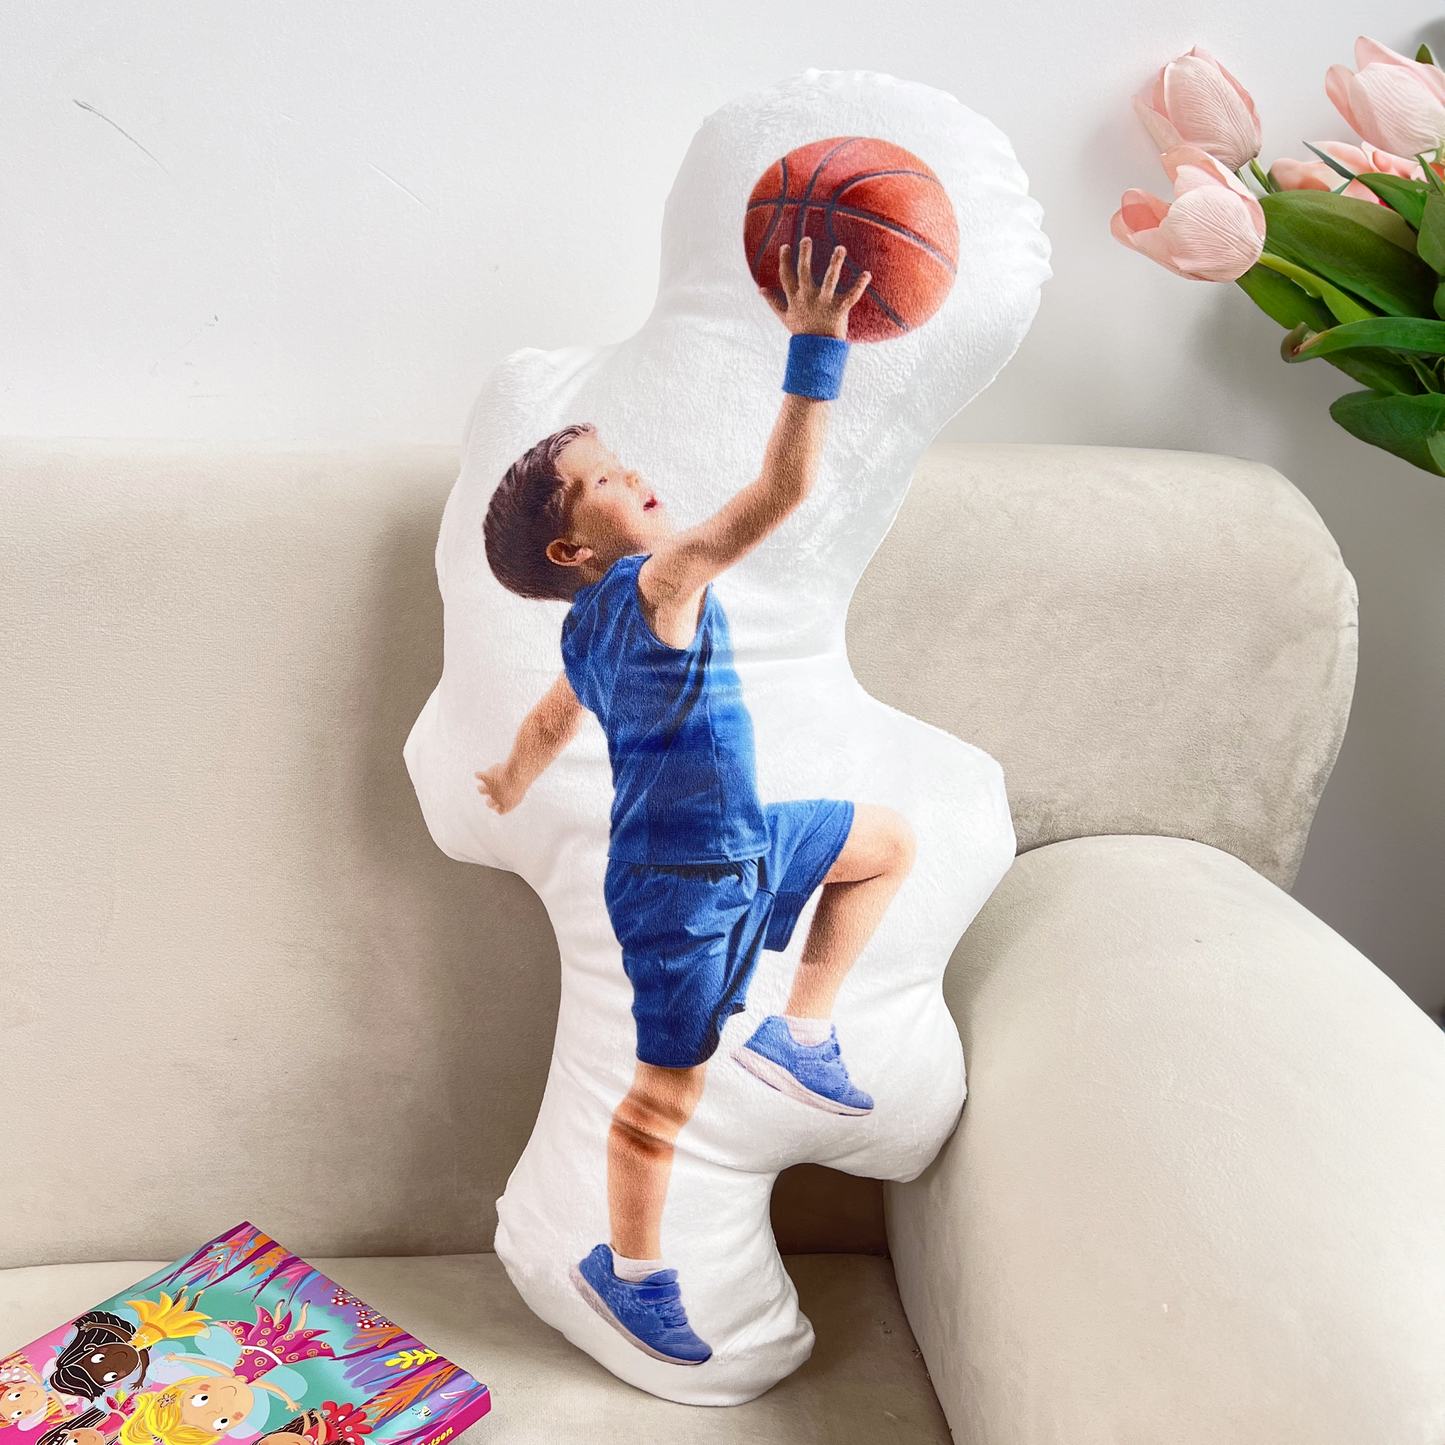 Basketball Boys Girls Gifts For Son Daughter Grandkids - Personalized Photo Custom Shaped Pillow